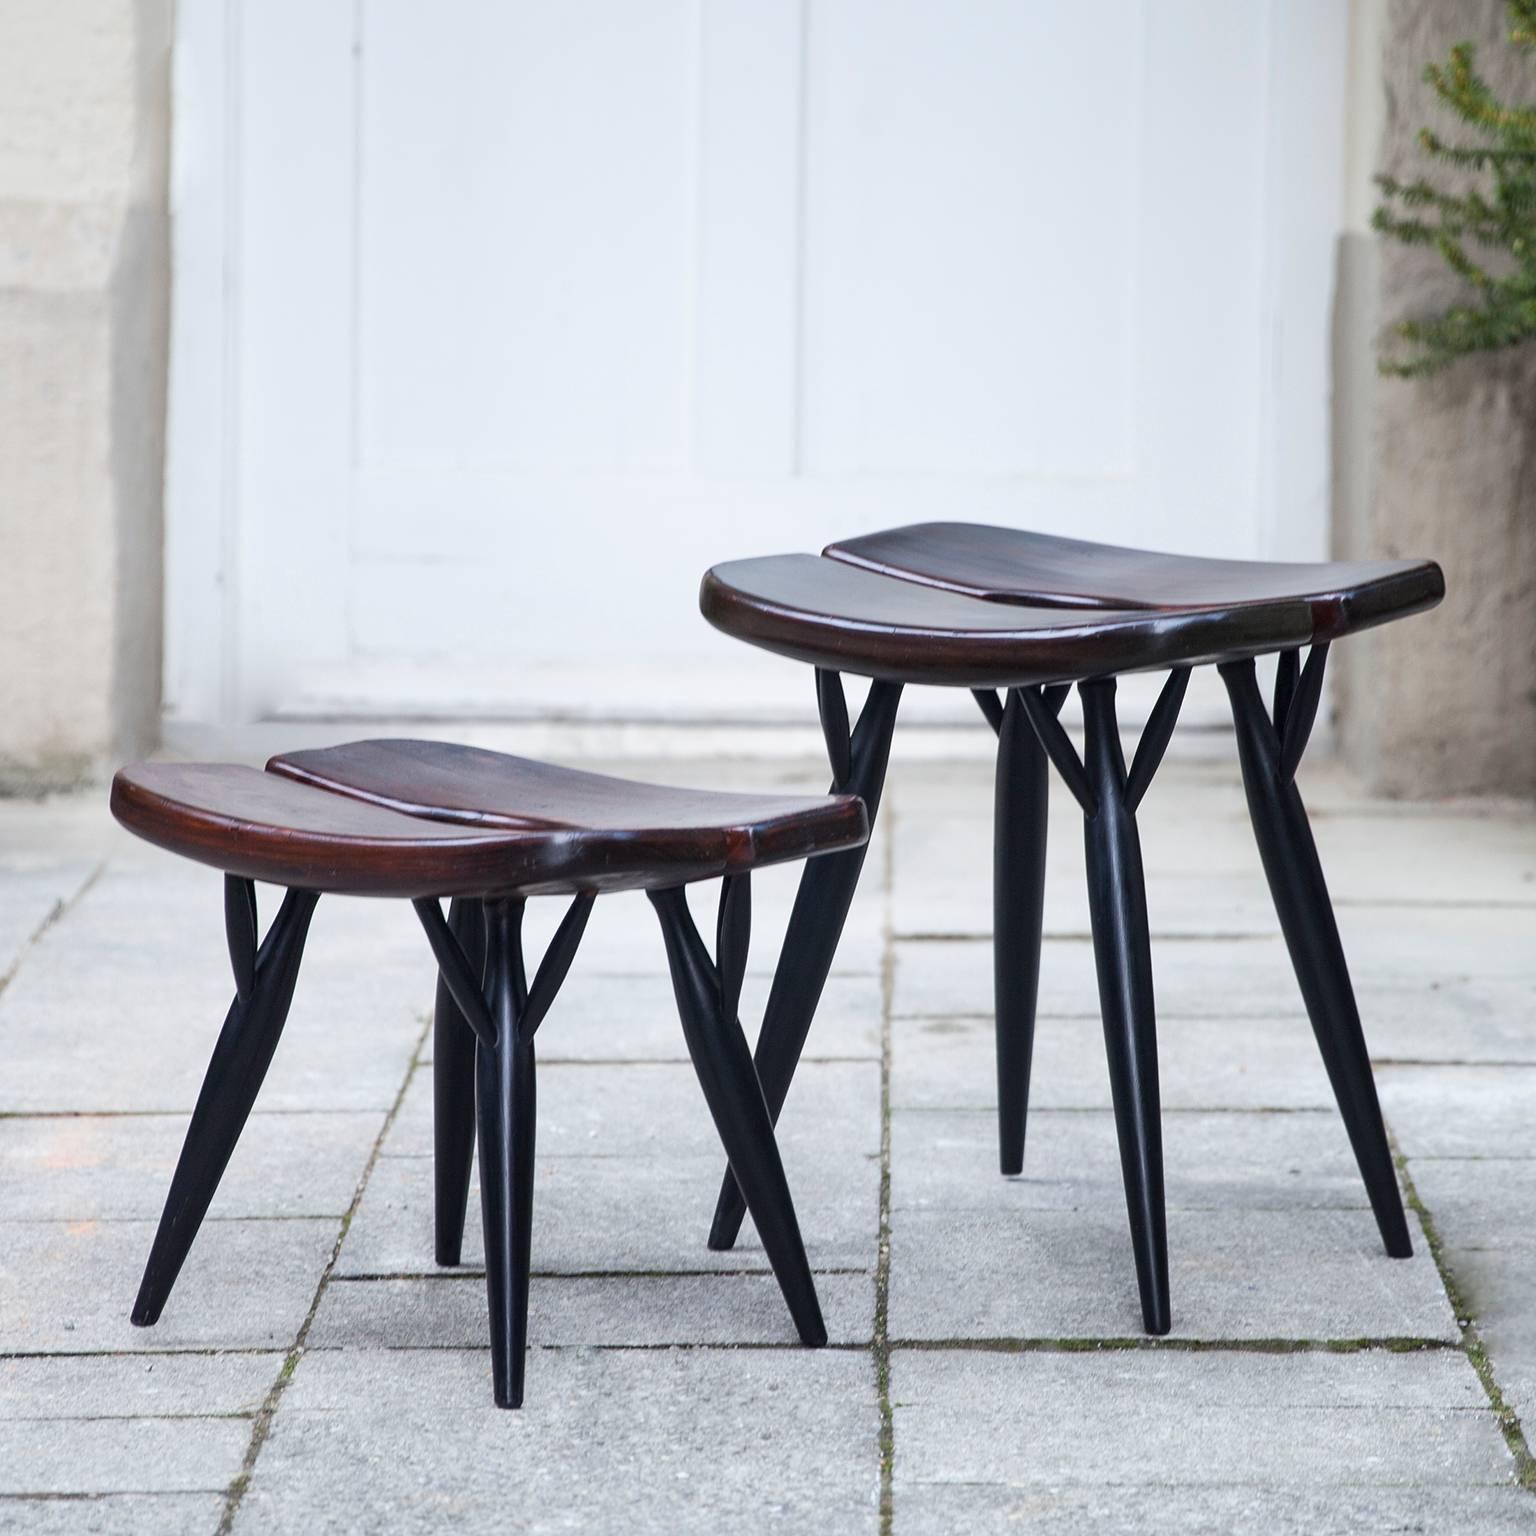 Ilmari Tapiovaara designed this Pirkka stools in the 1950s. The black legs and seats in stained pine result in a timeless Finnish design. The normal size Pirkka stool is made by Asko and rare low sauna stool is made by Laukaan Puu and the height of